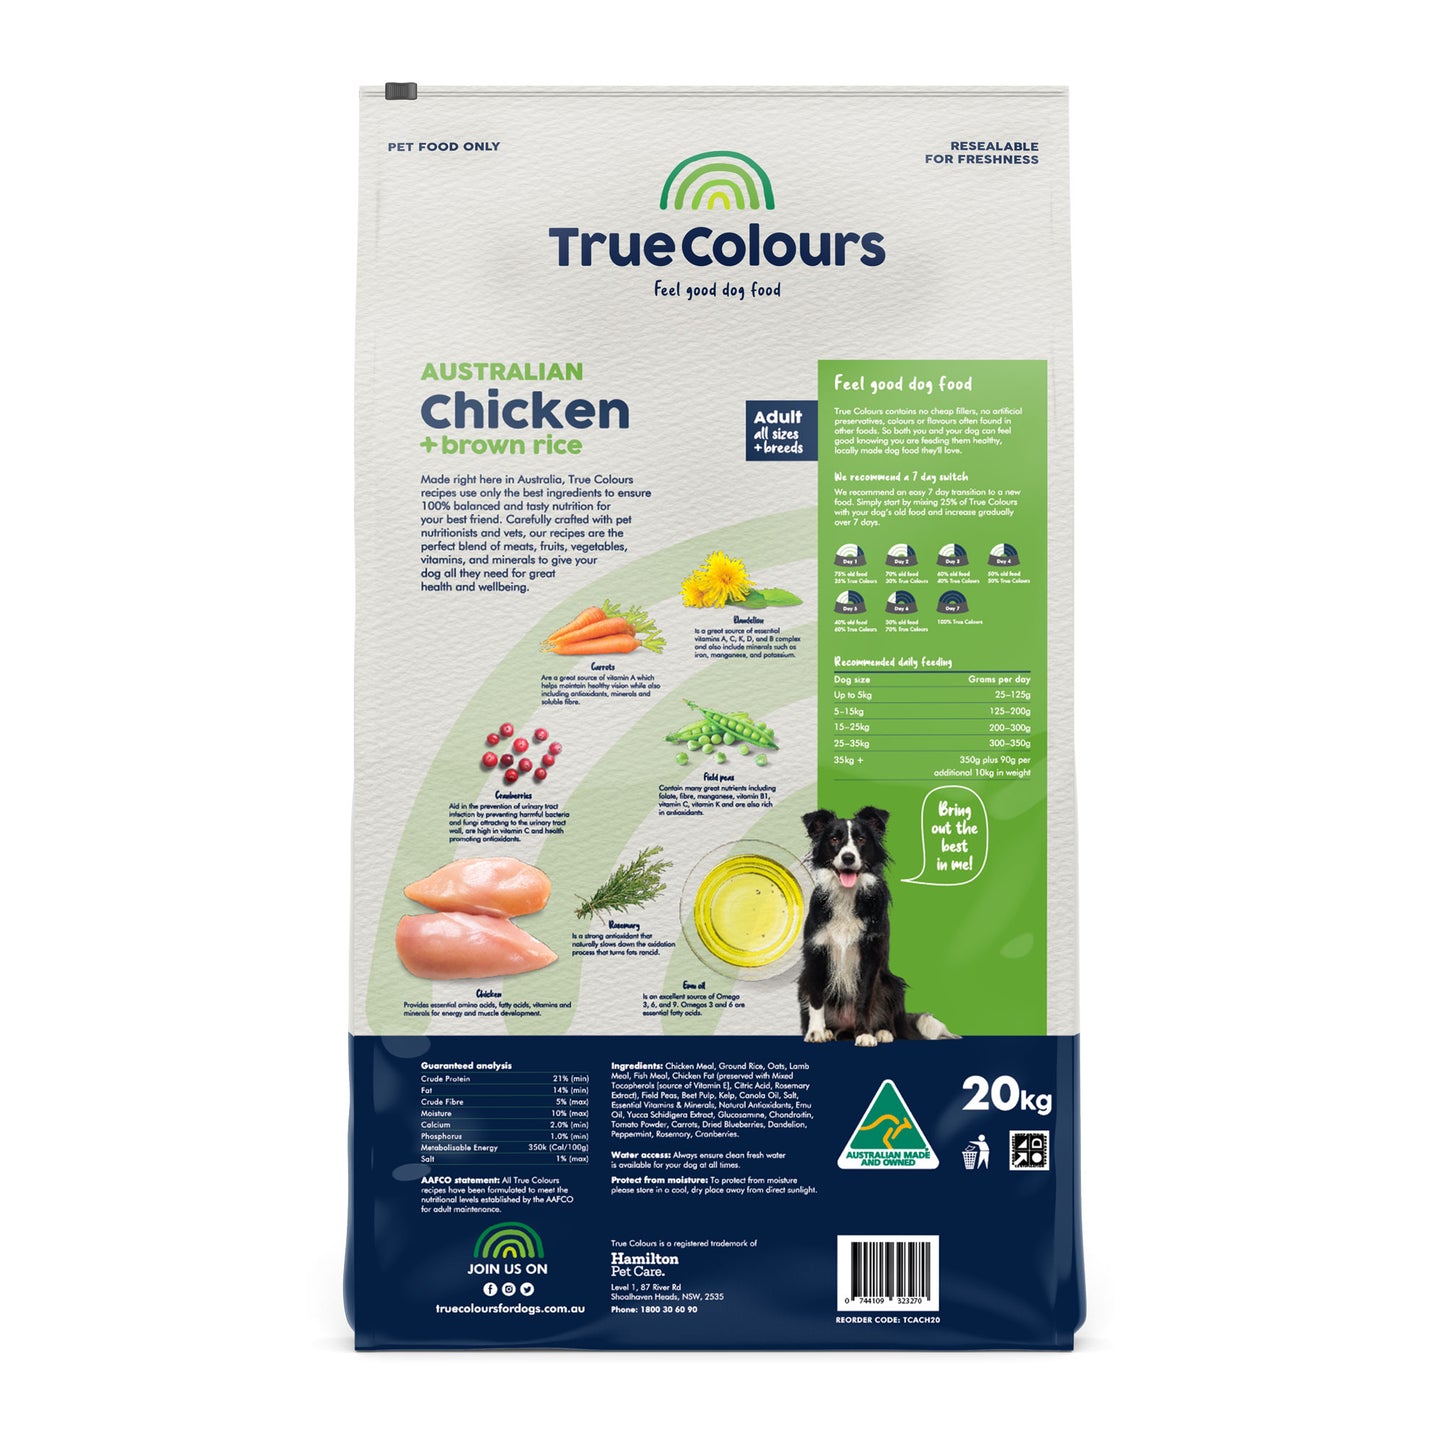 True Colours Chicken Adult Food